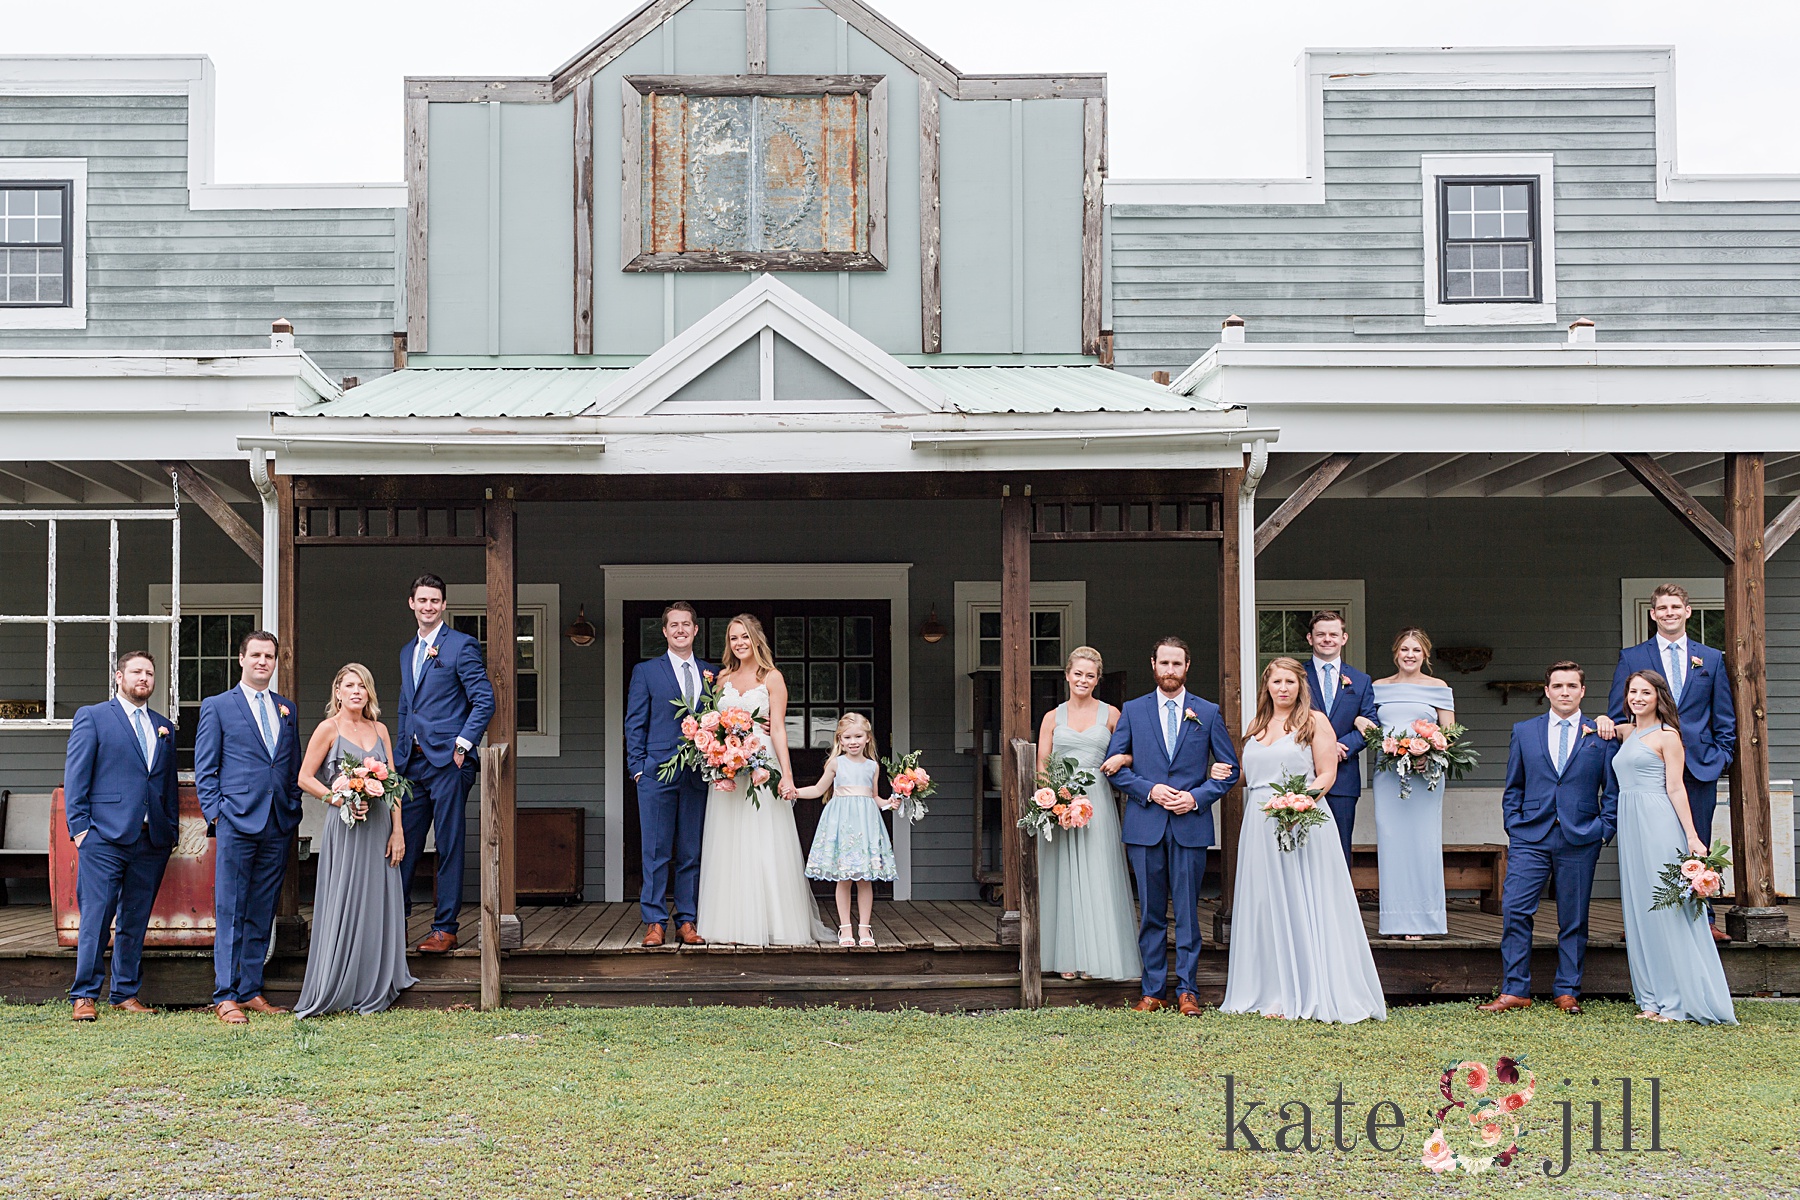 wedding party standing on porch everly at railroad wedding